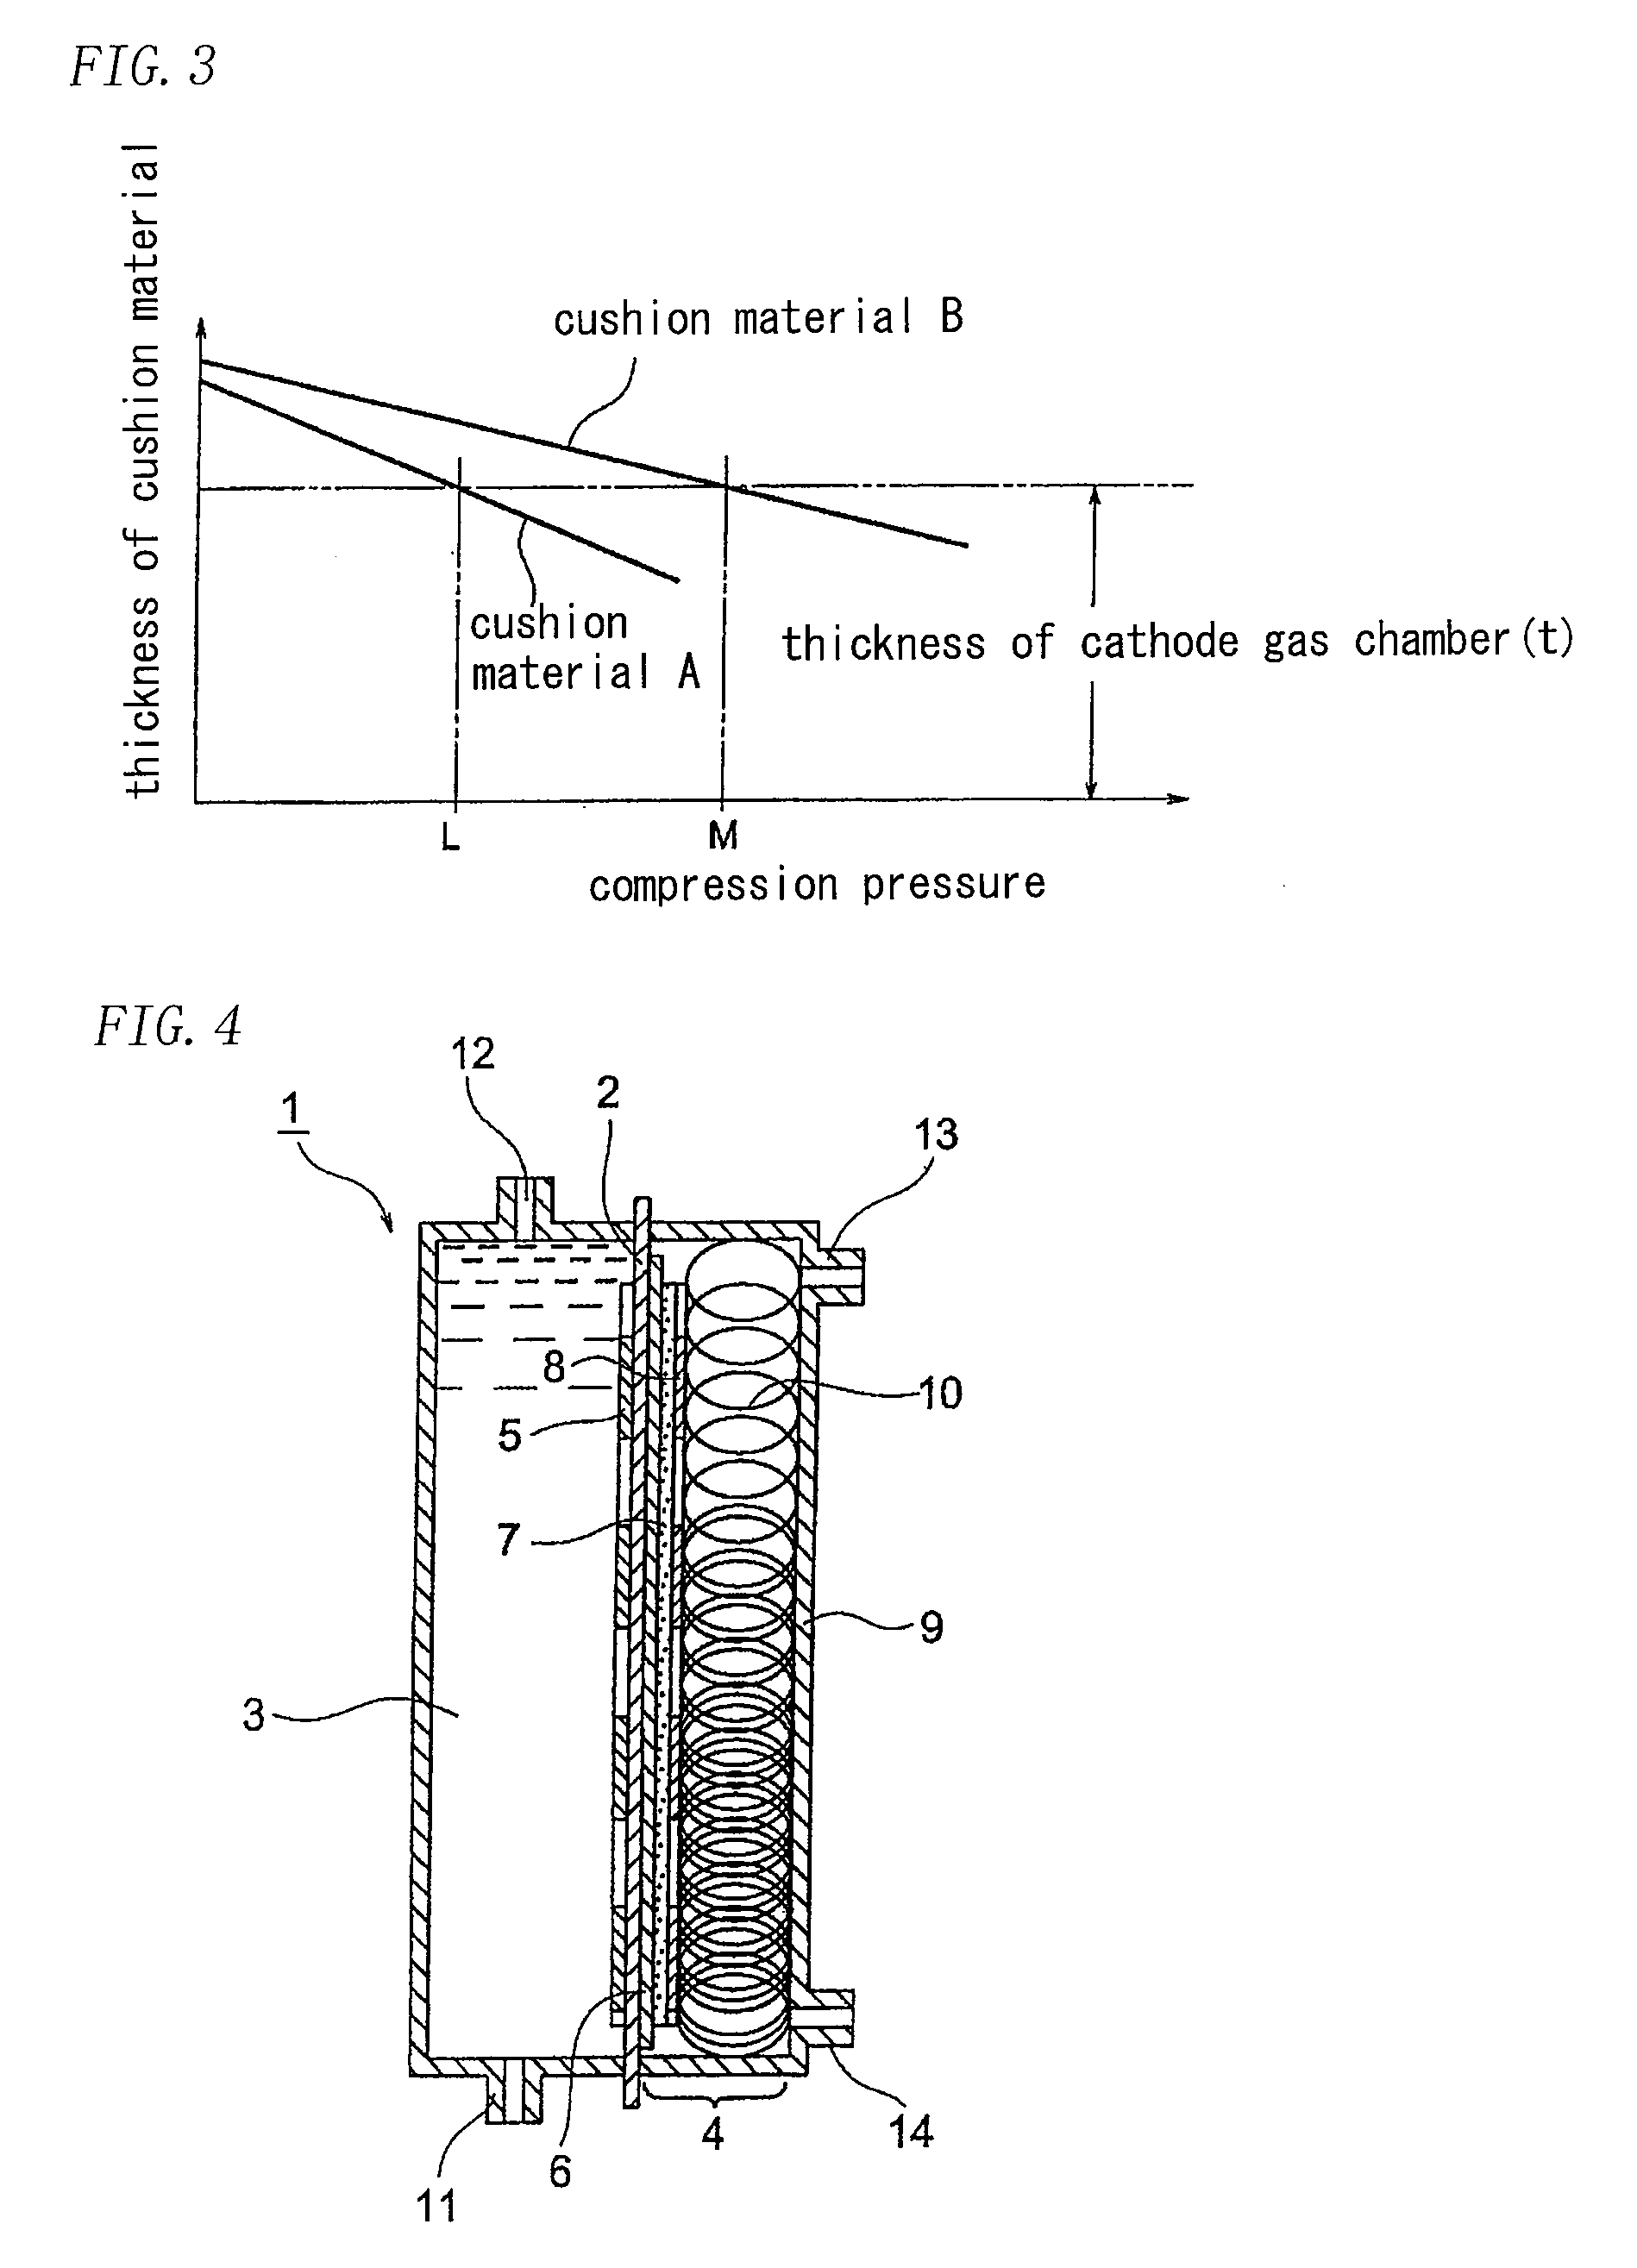 Ion exchange membrane electrolytic cell